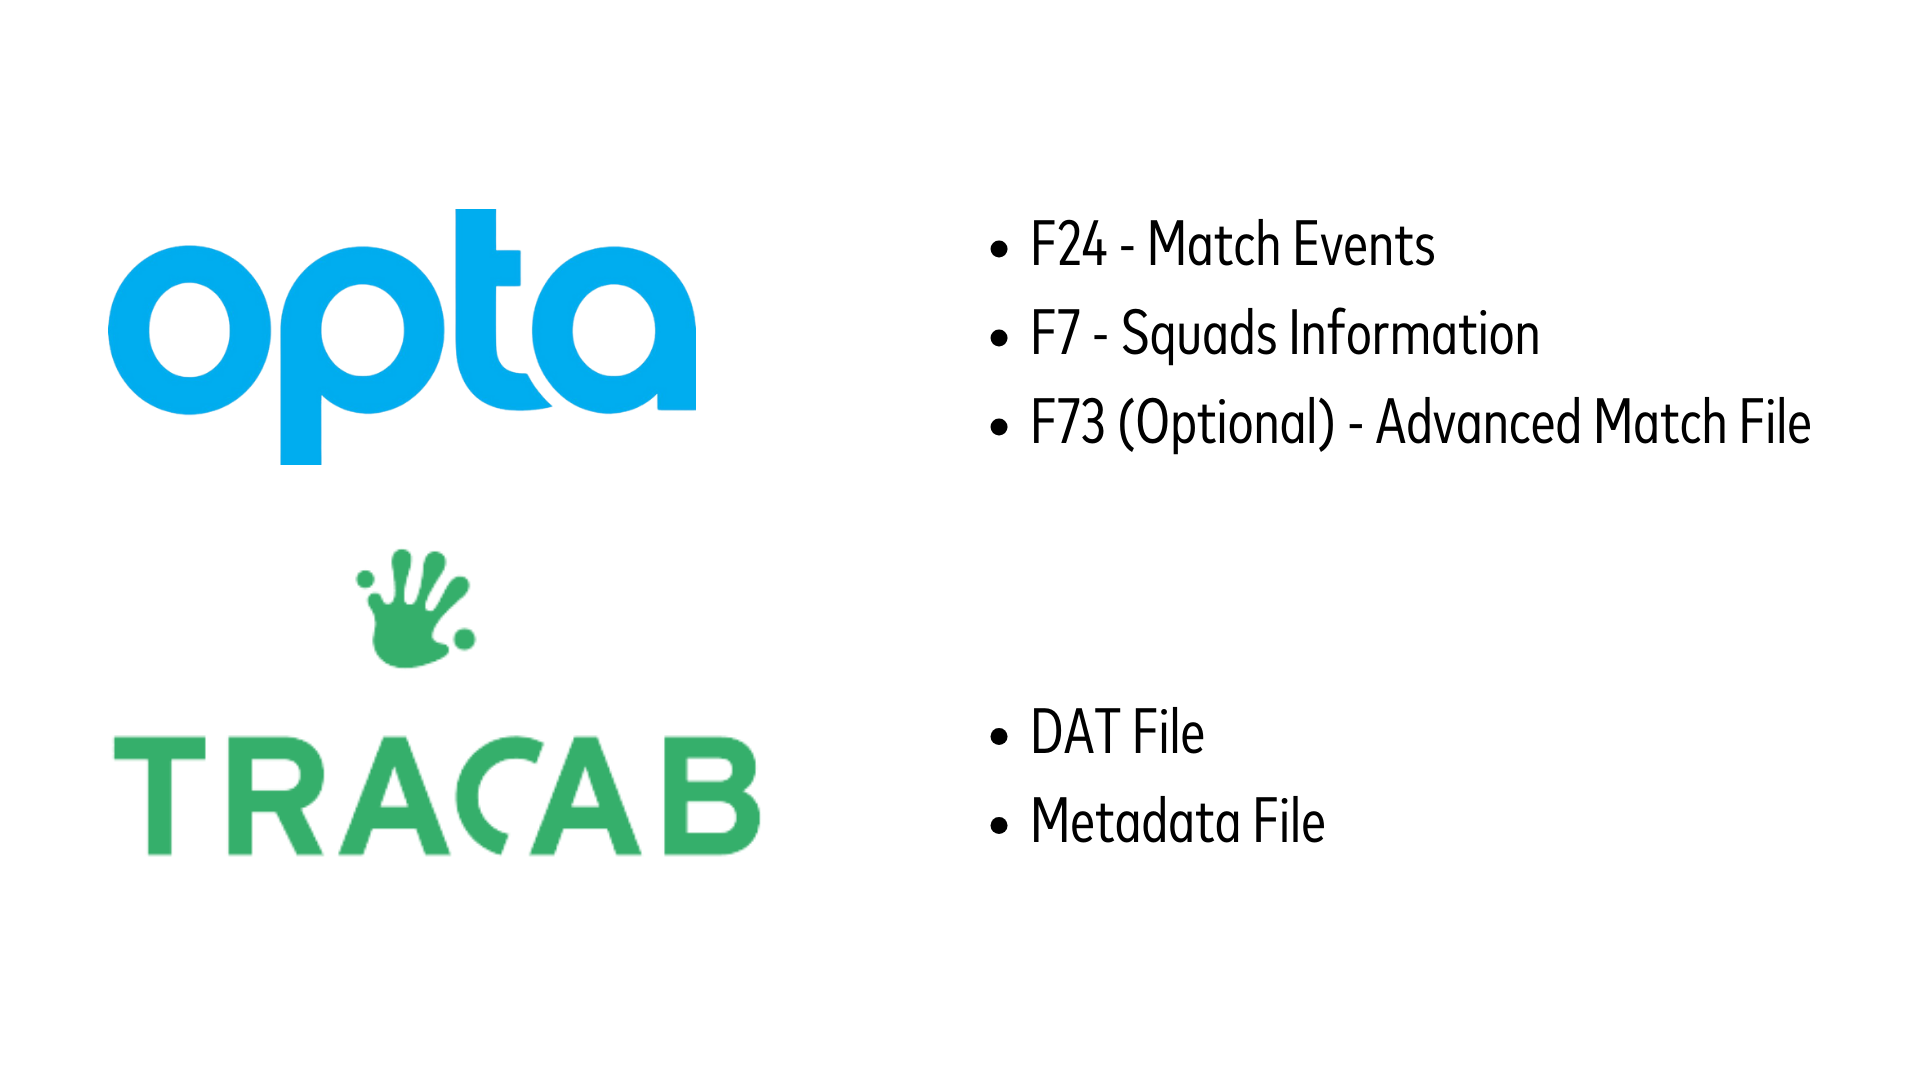 Logos of Opta and TracAb on a plain background. Opta is presented in blue text with a swooping circular element, and TracAb below in green with a handprint symbol, indicating their partnership in providing eventing and positioning data for sports analysis.